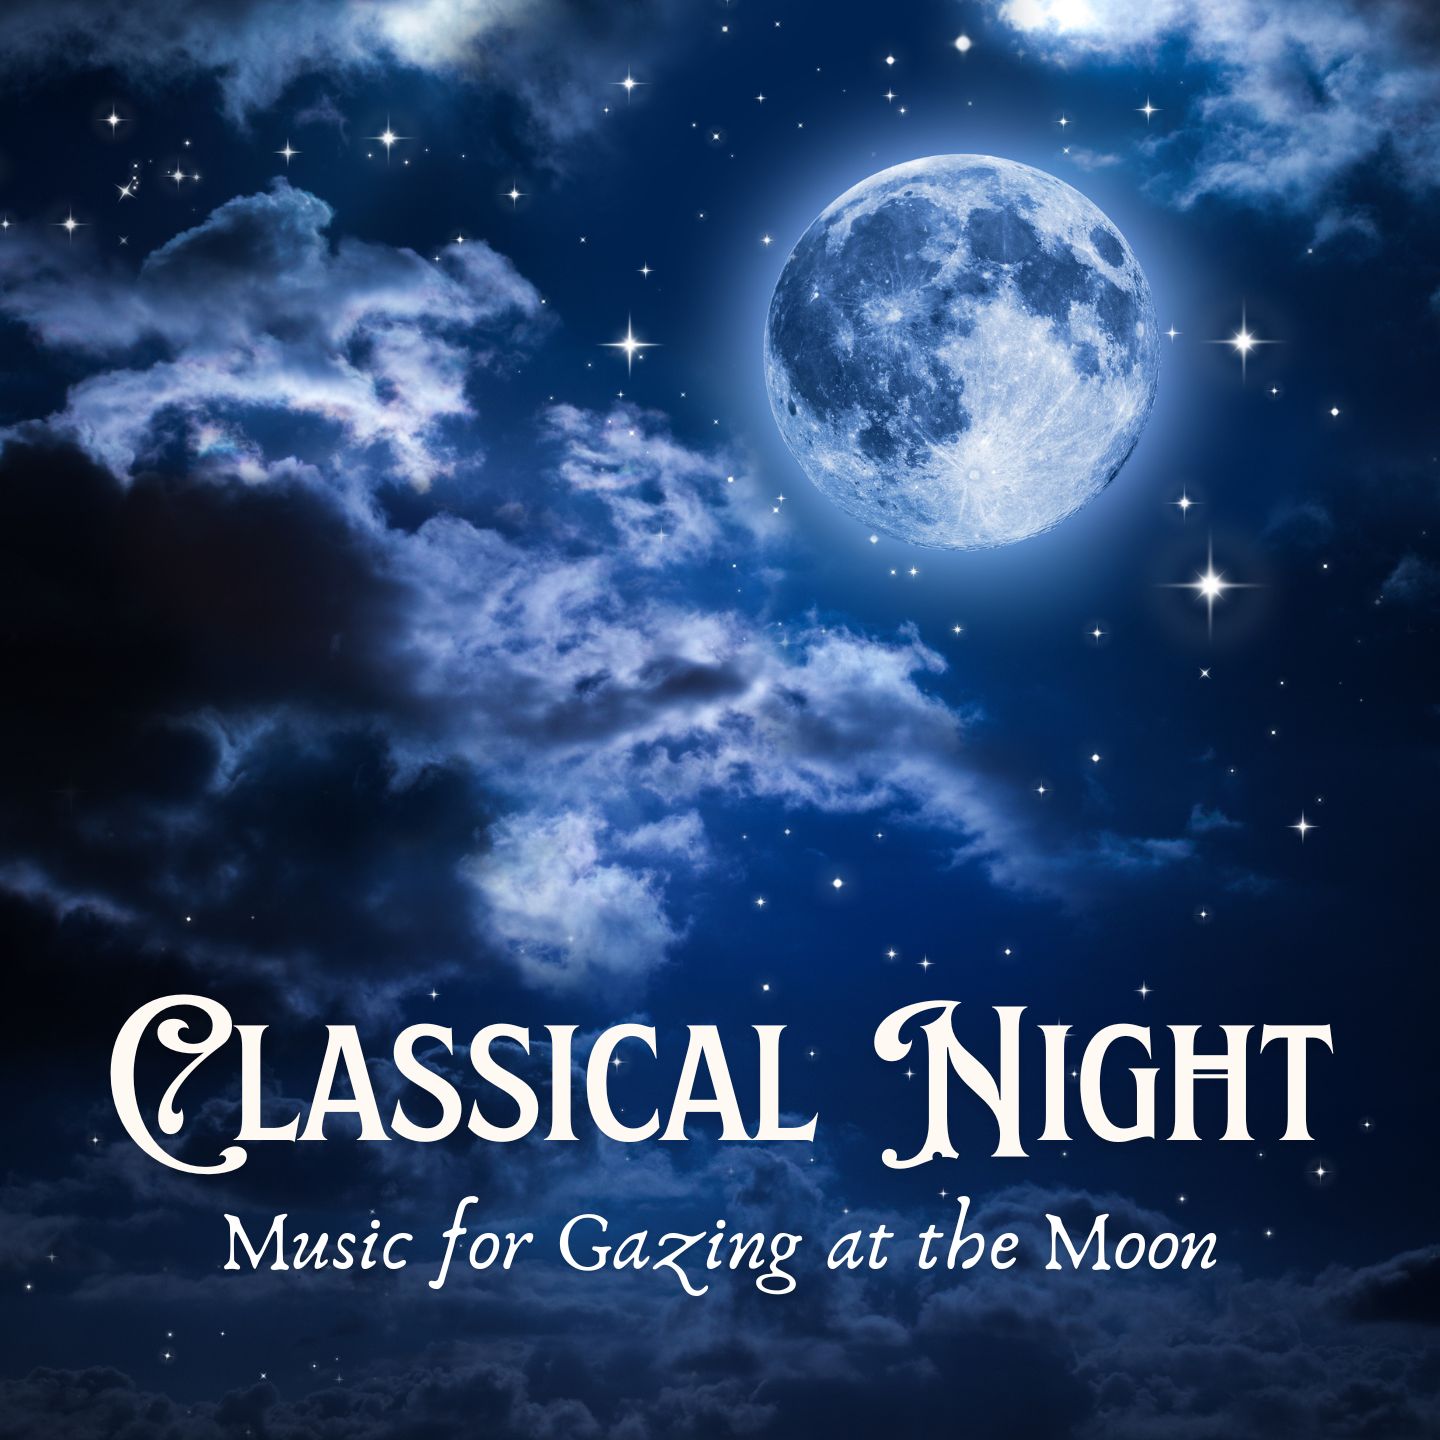 Classical Night | Classical Music for Gazing at the Moon